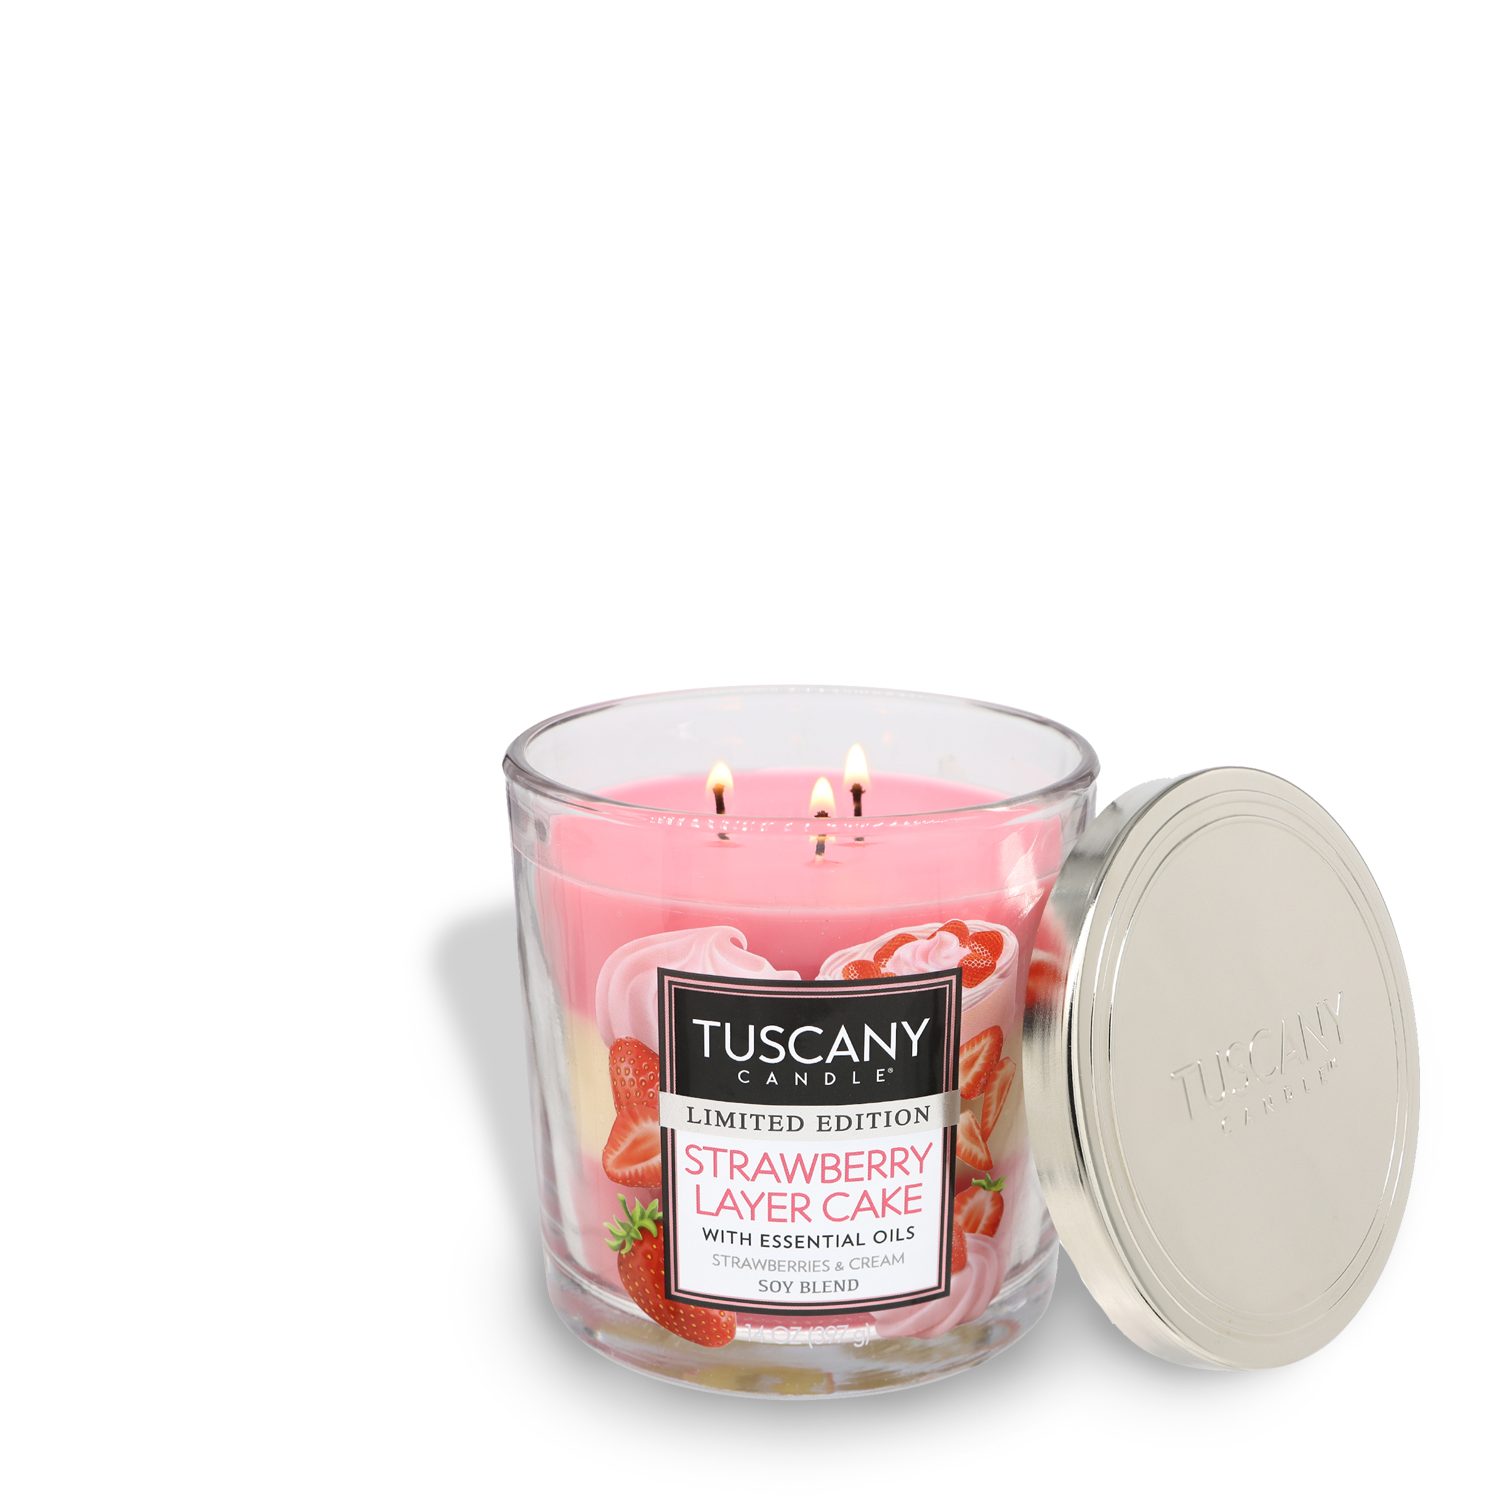 A Strawberry Layer Cake fragrance notes candle in a jar by Tuscany Candle® SEASONAL.